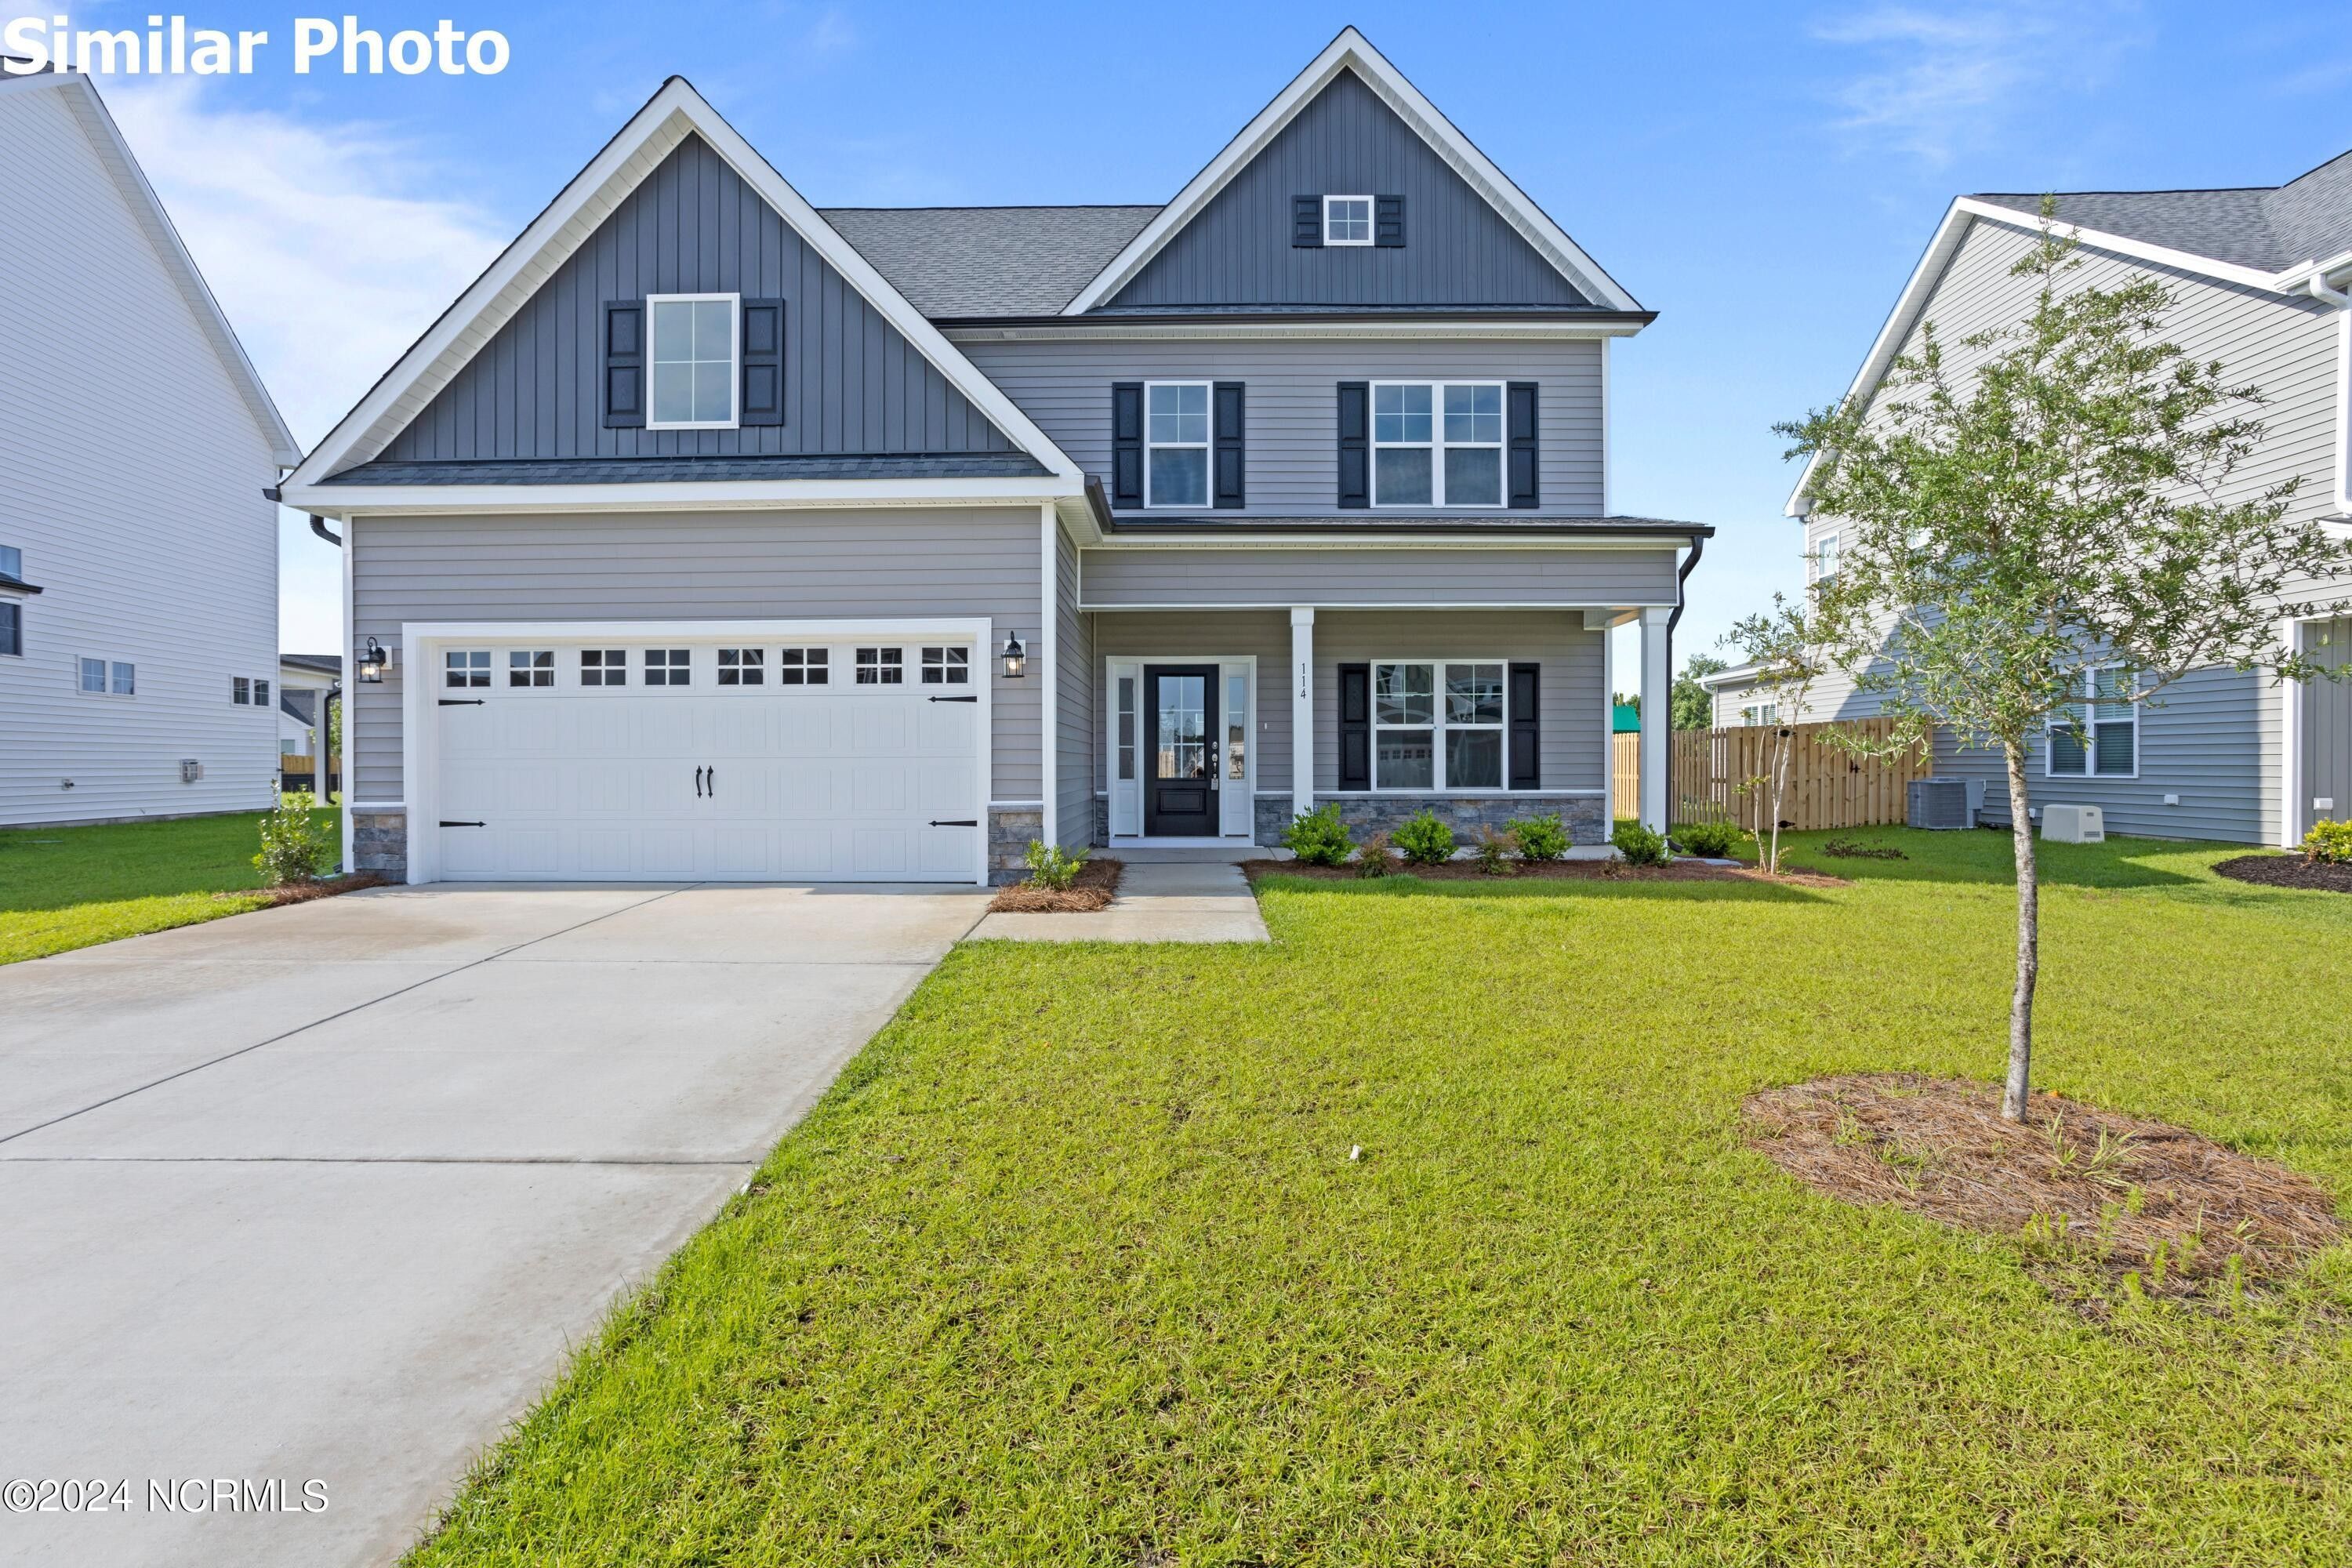 435 Northern Pintail Place. Hampstead, NC 28443